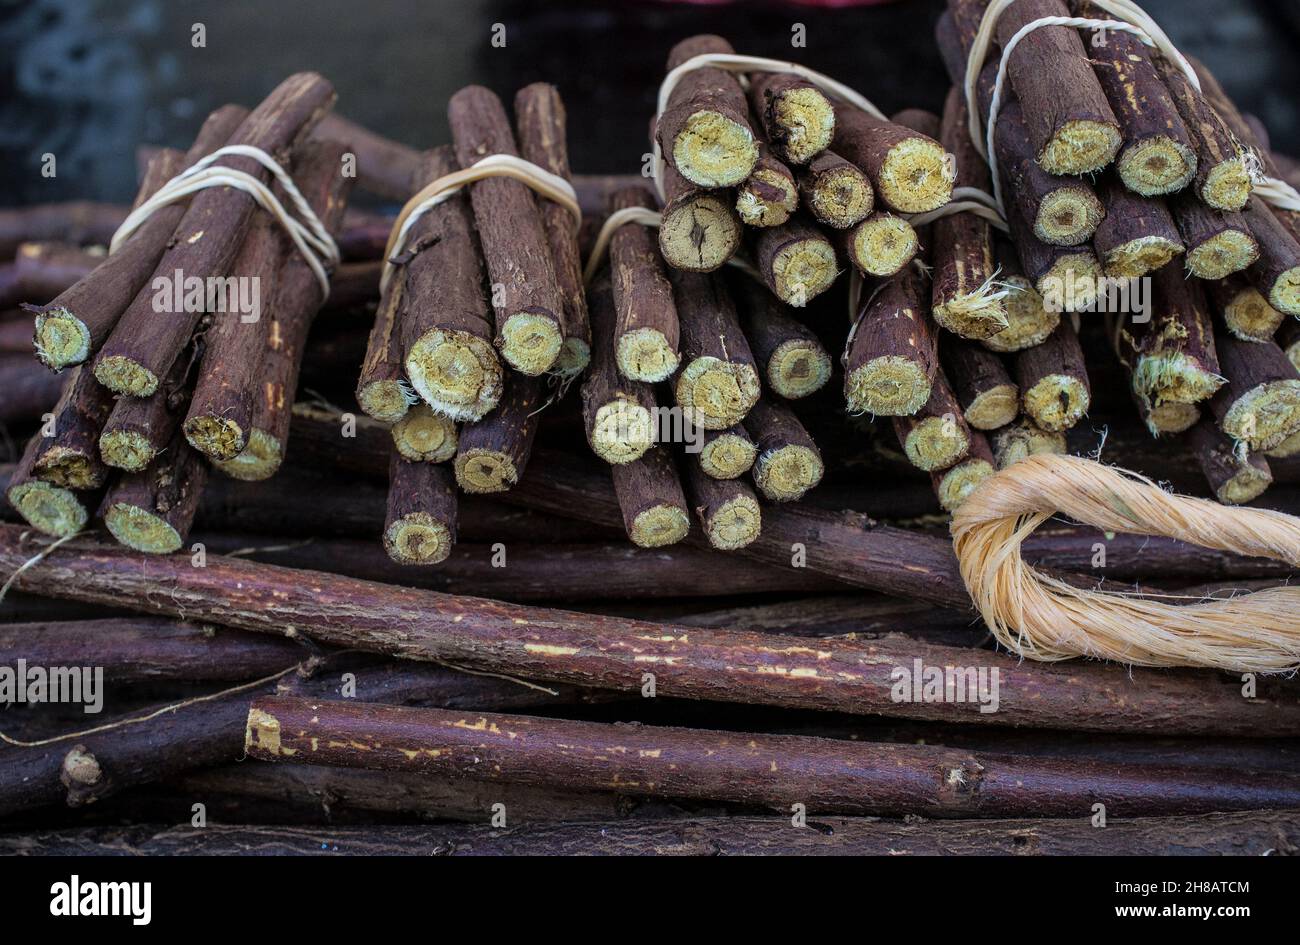 Dried sticks of liquorice root. Thre are displayed in its natural form Stock Photo